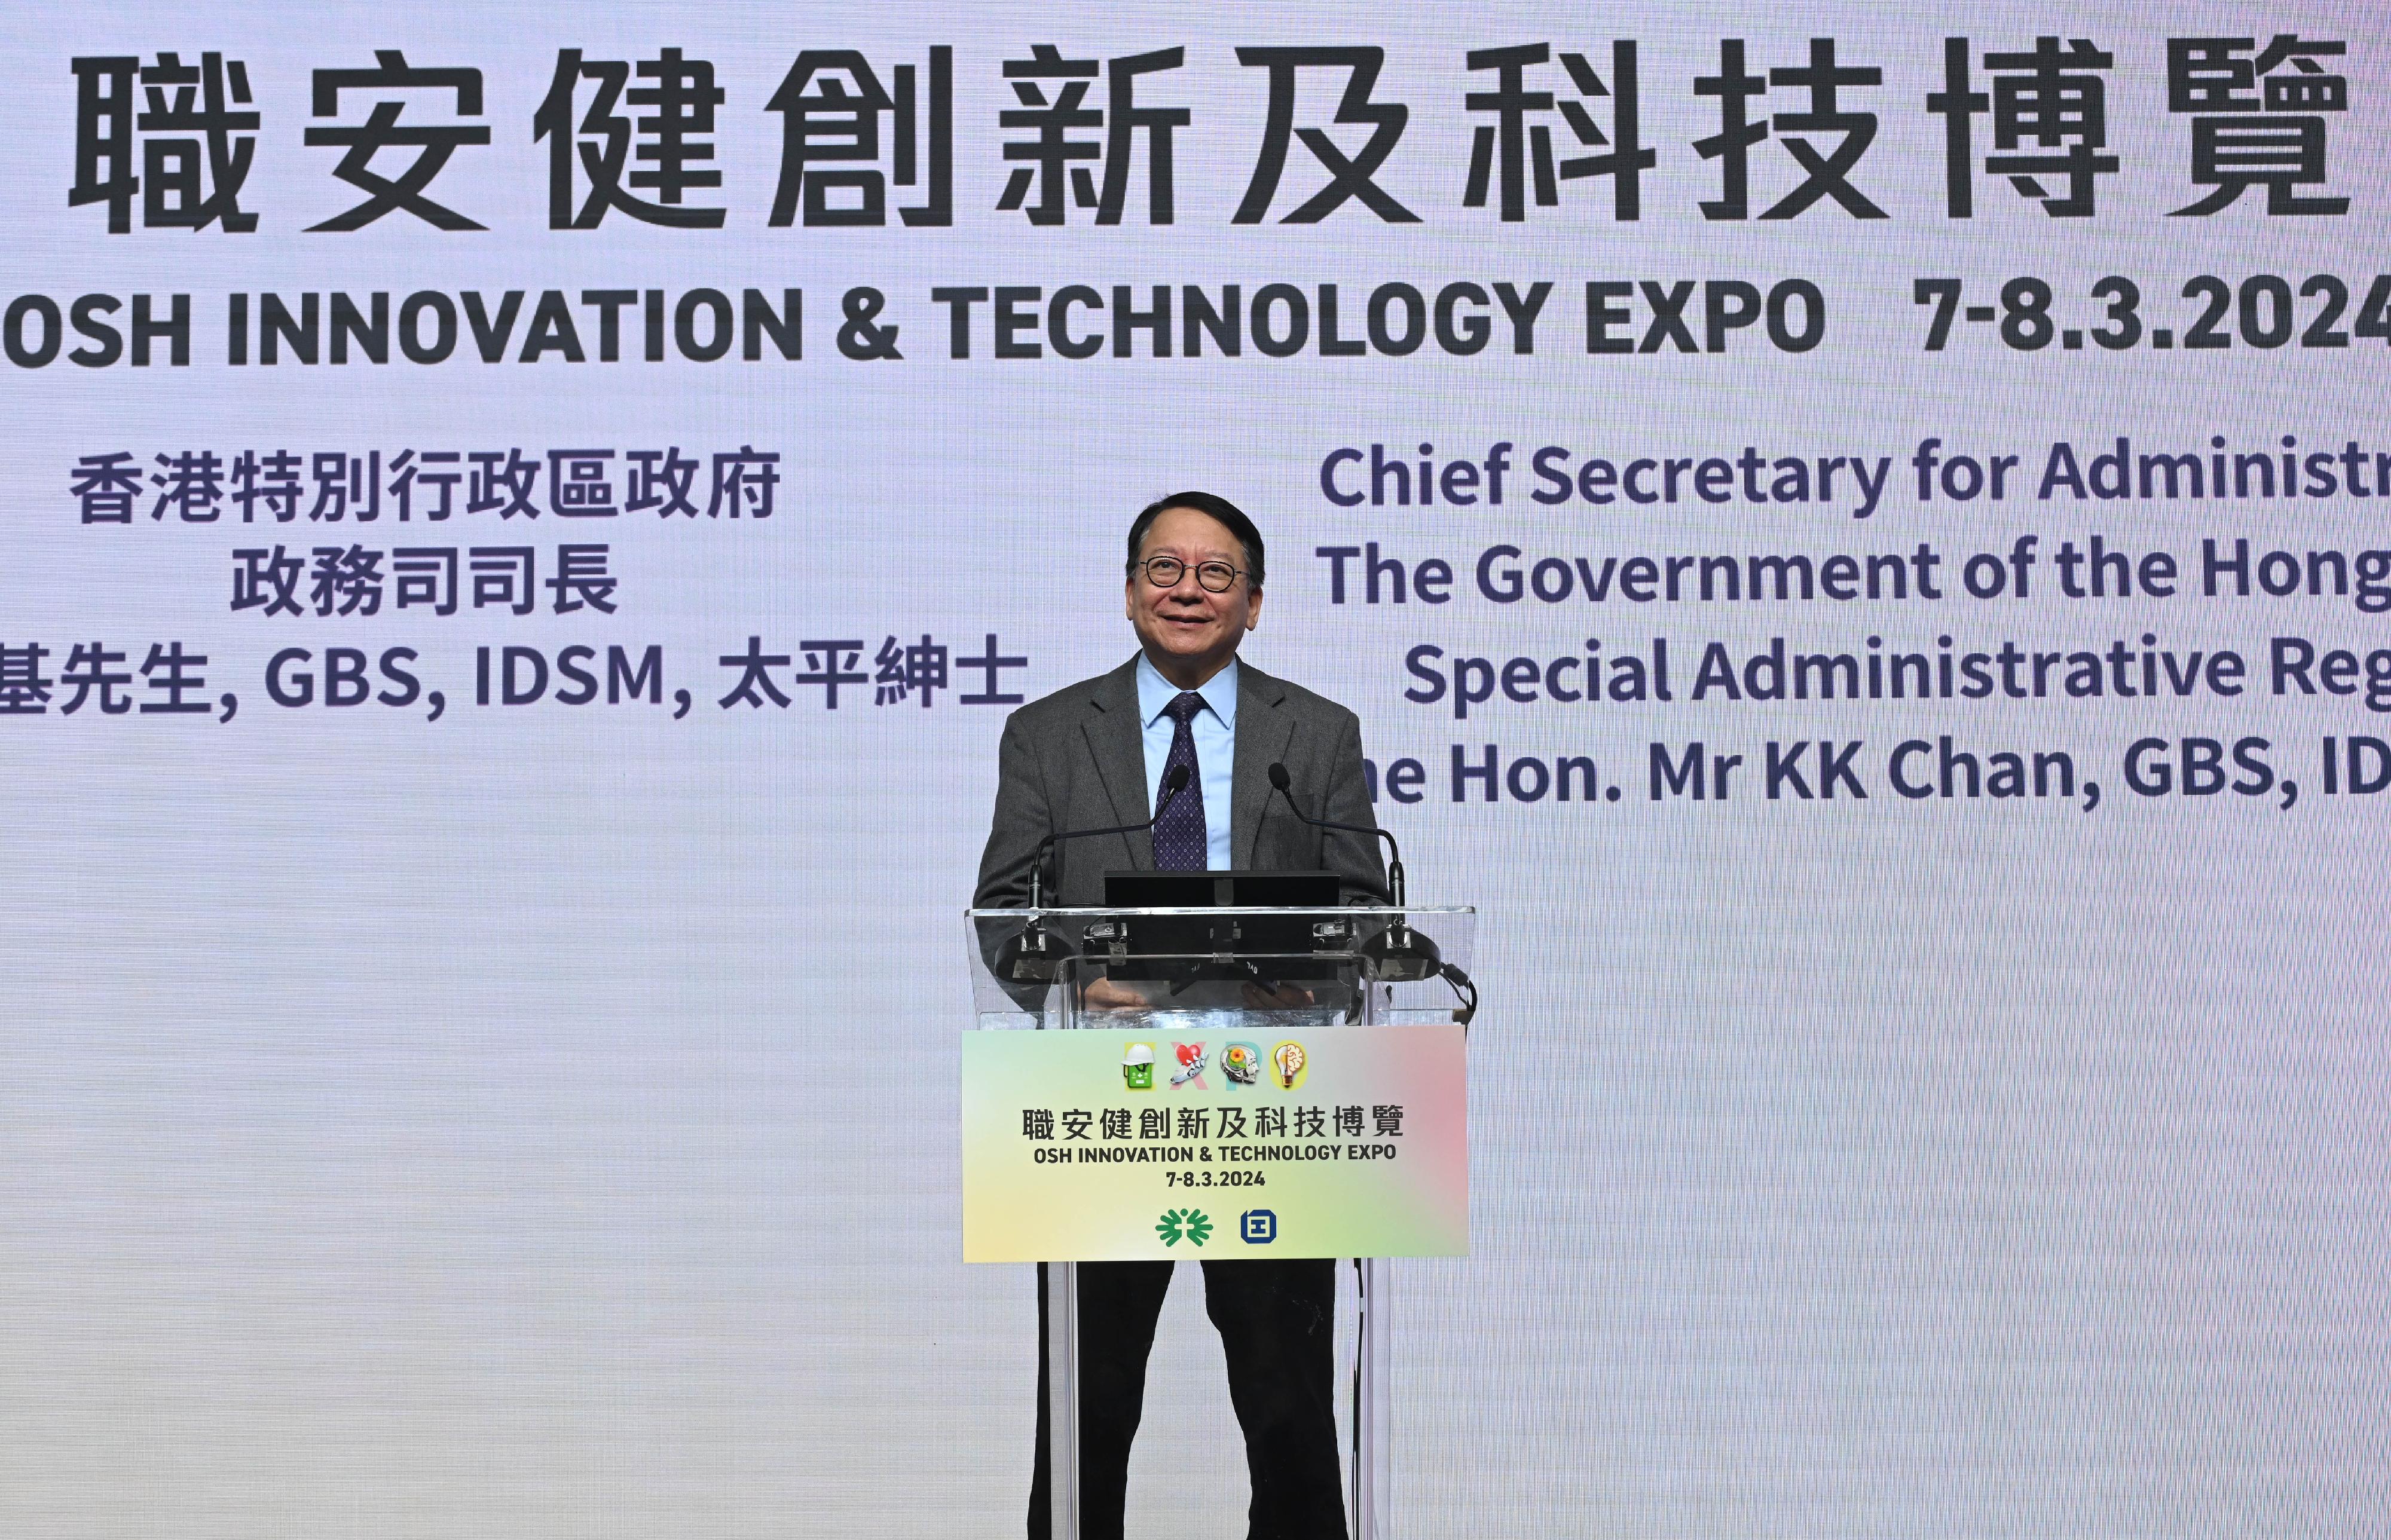 The Chief Secretary for Administration, Mr Chan Kwok-ki, speaks at the opening ceremony of the OSH Innovation & Technology Expo today (March 7).
